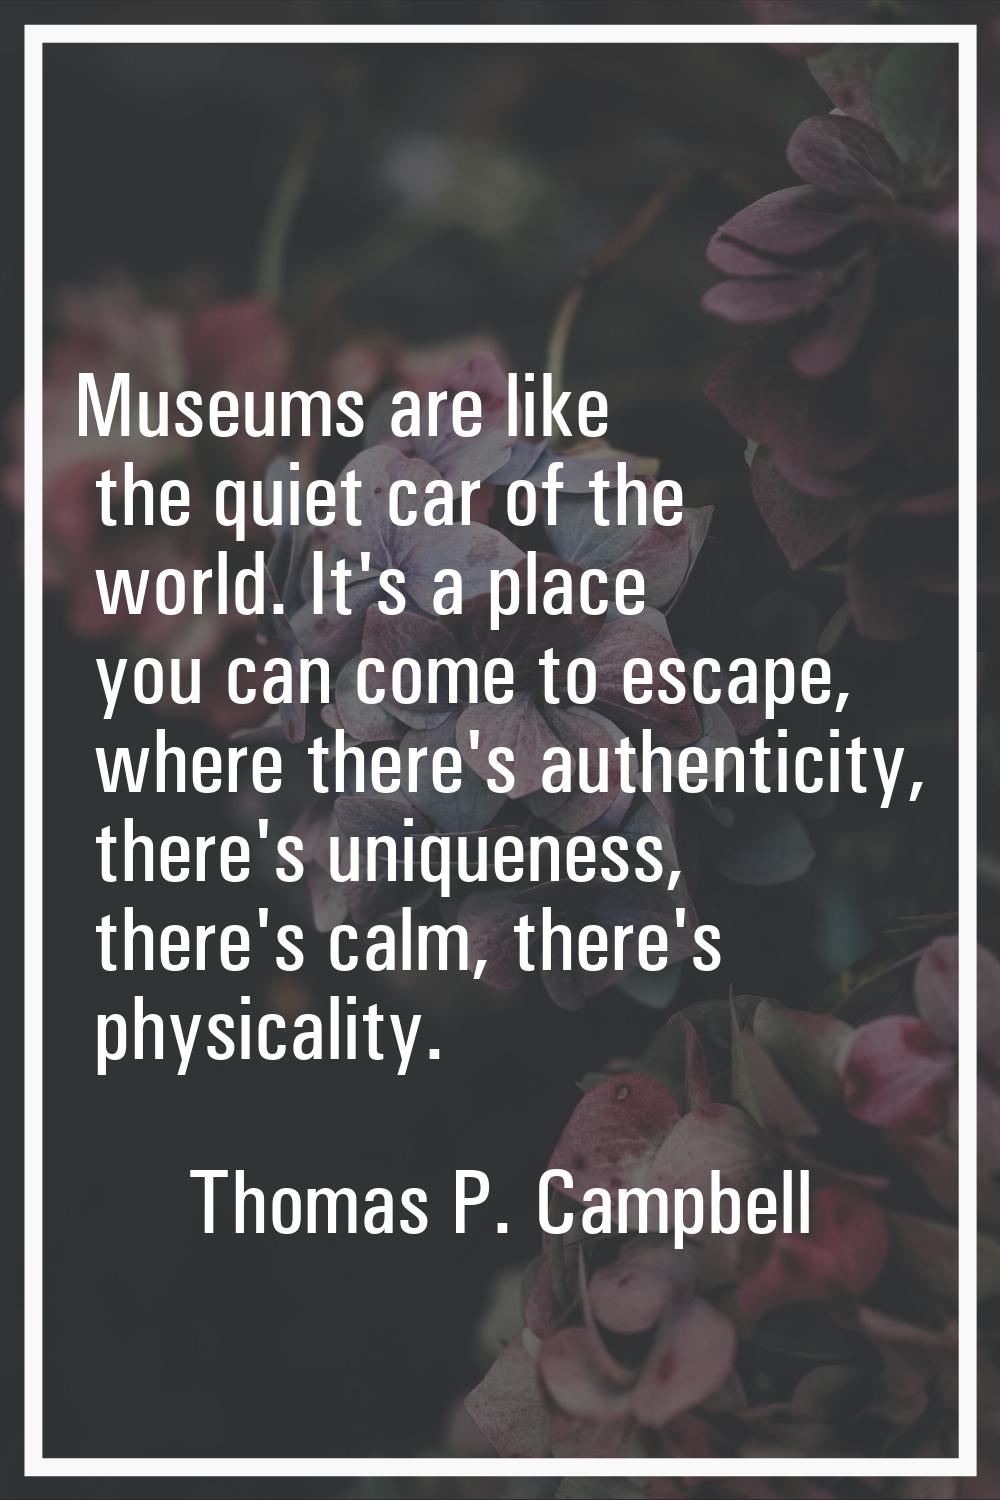 Museums are like the quiet car of the world. It's a place you can come to escape, where there's aut